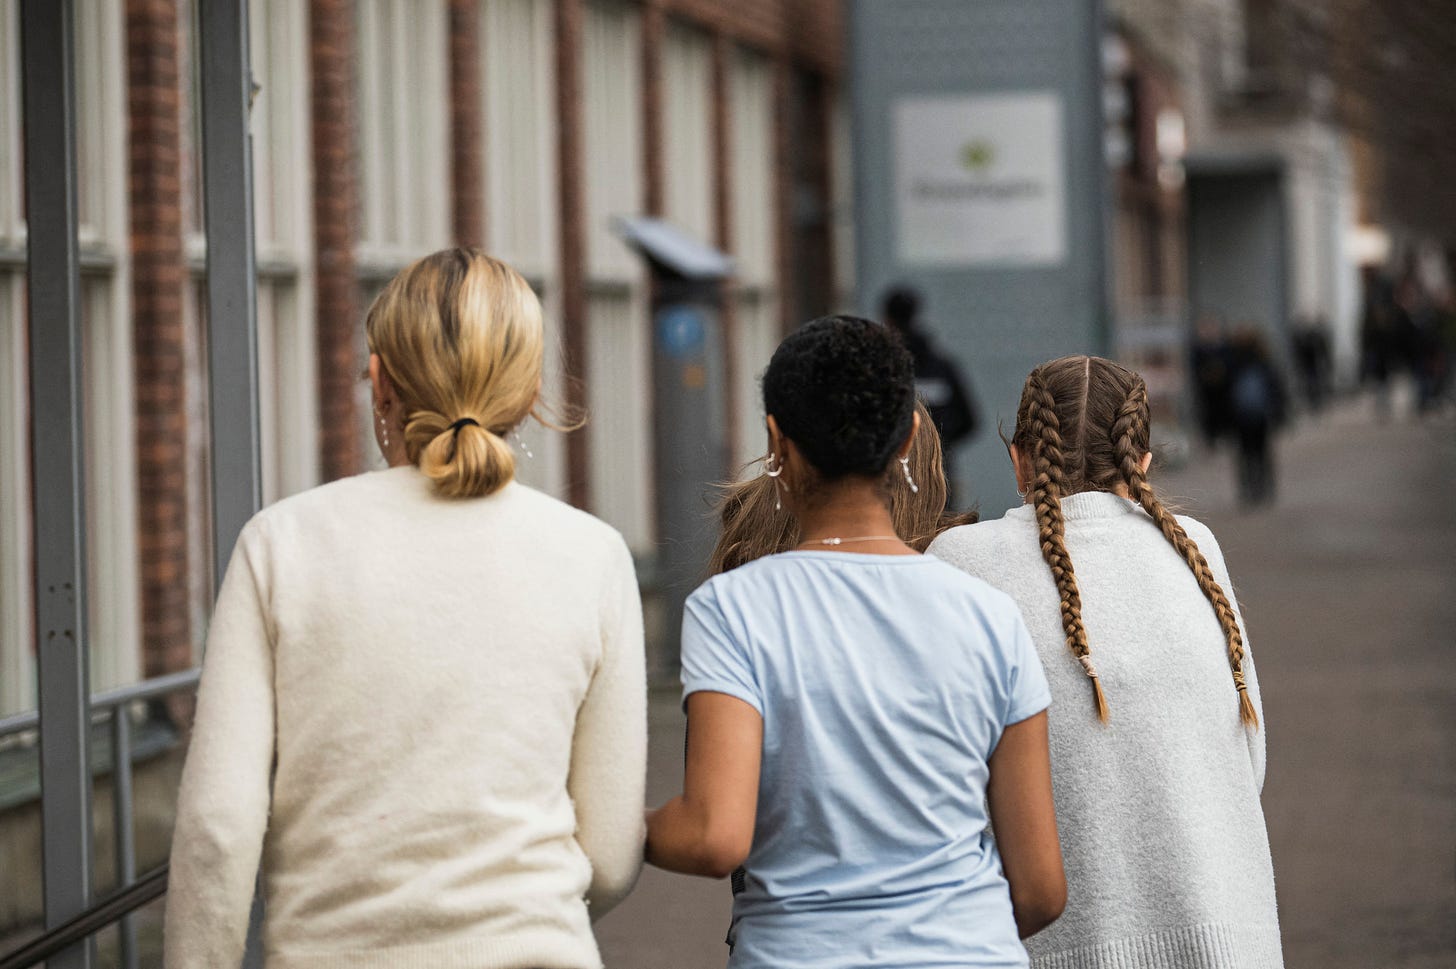 Teenagers walk in the streets of Sundbyberg near Stockholm. Sweden, the world’s first country to recognise transgender rights, has begun restricting gender hormone treatments for minors. (Jonathan Nackstrand/AFP via Getty Images.)